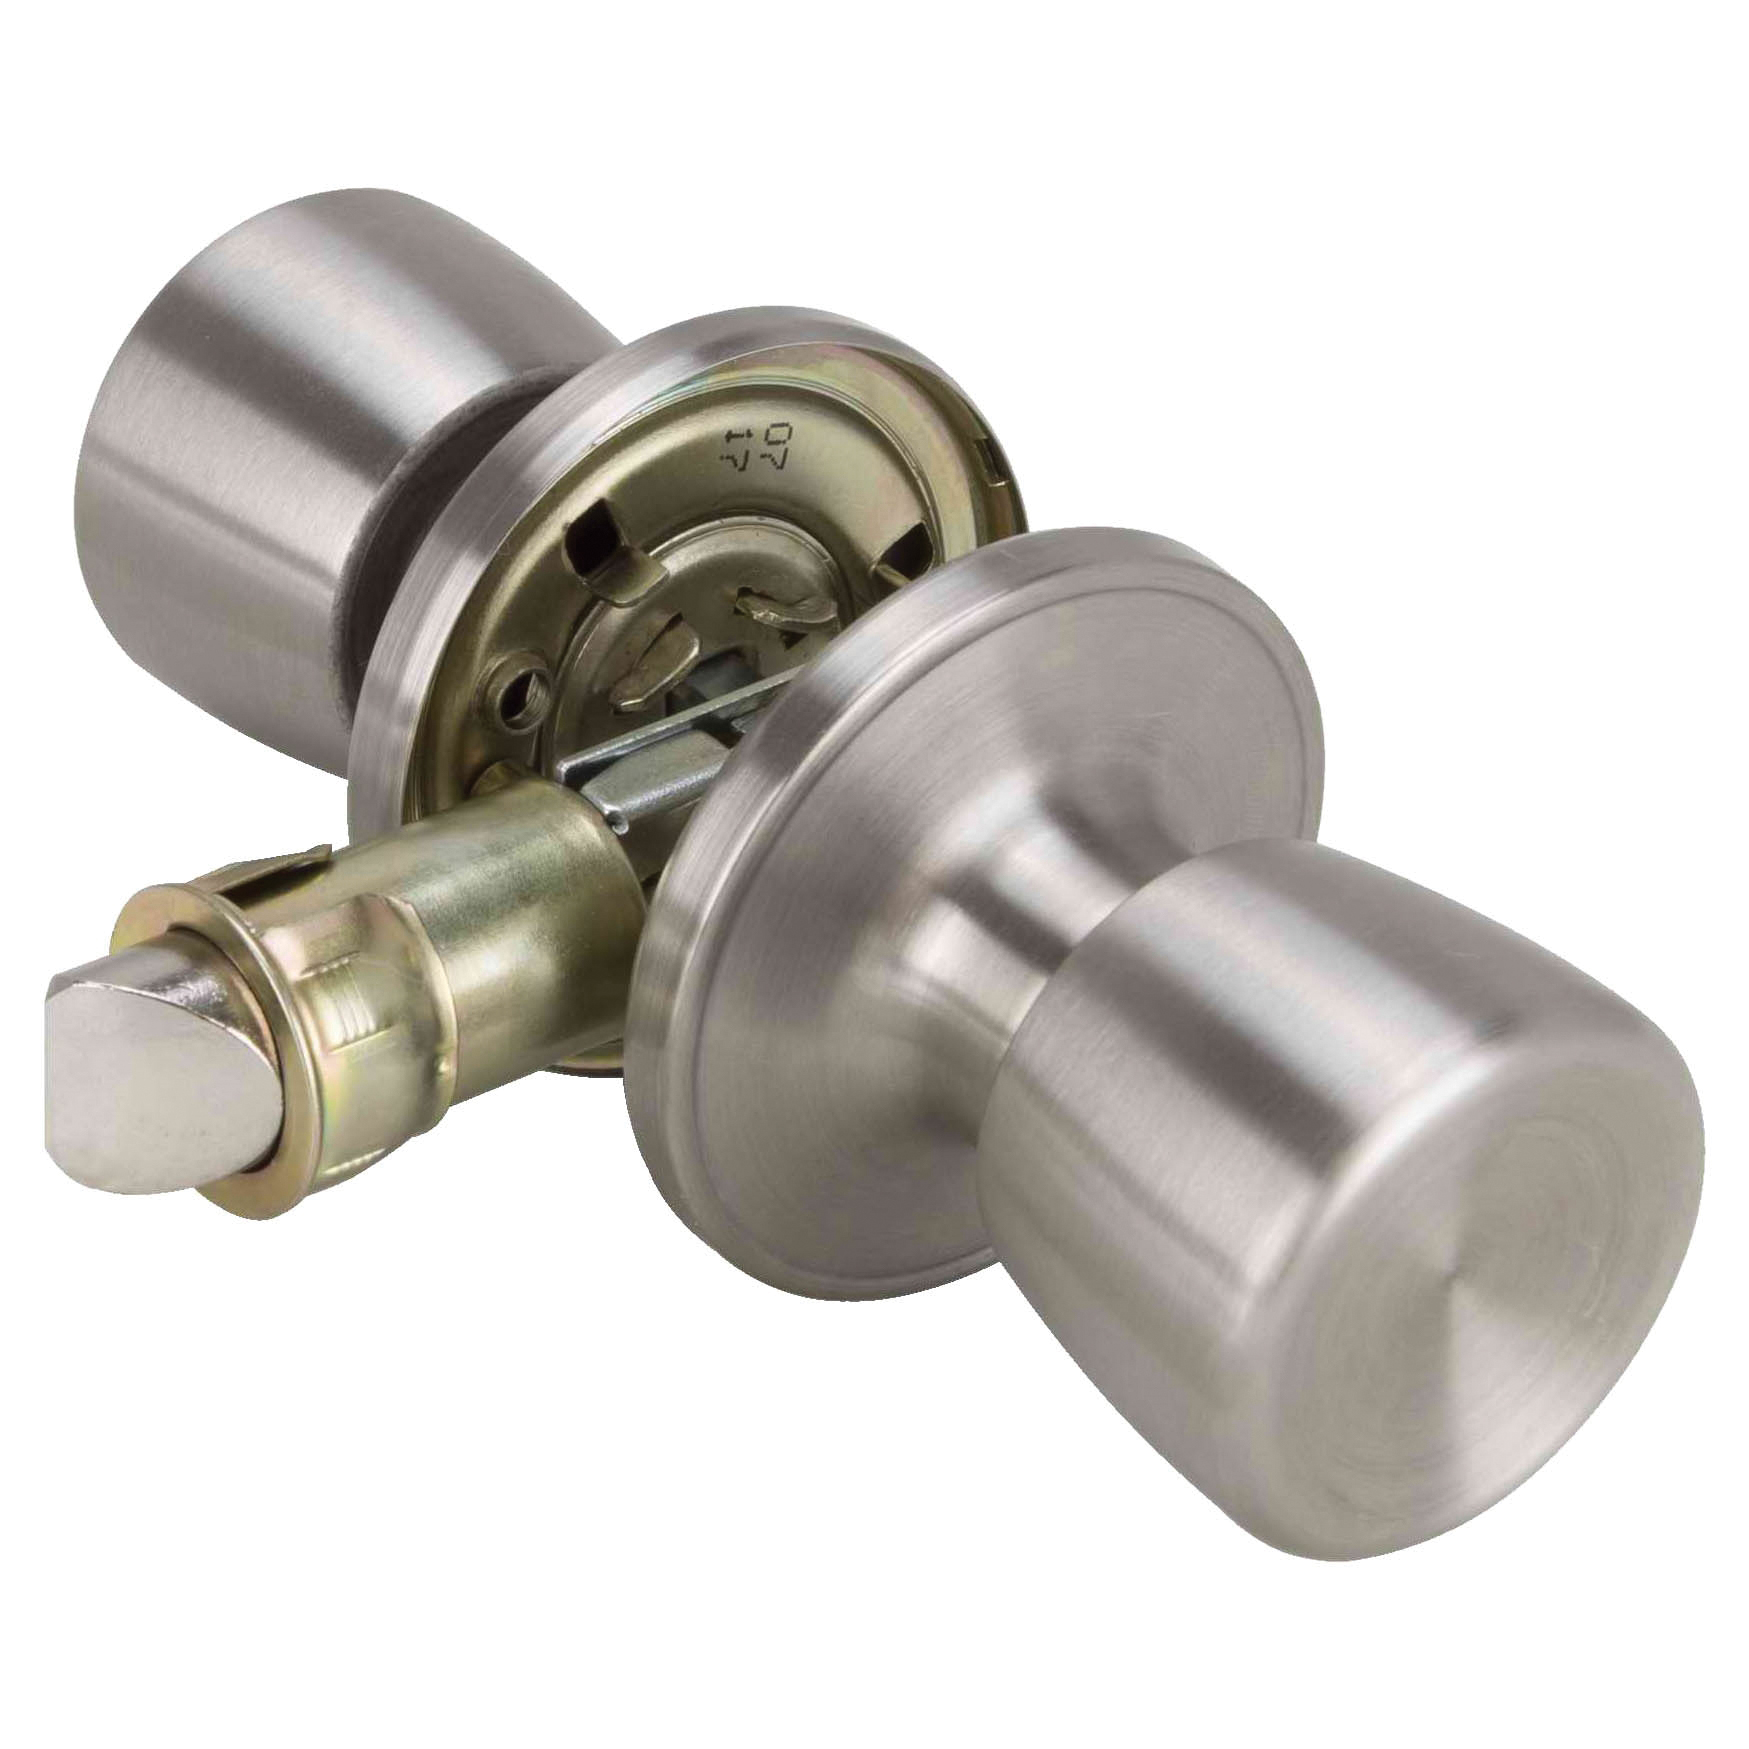 T-5764SS-PS Passage Knob, Metal, Stainless Steel, 2-3/8 to 2-3/4 in Backset, 1-3/8 to 1-3/4 in Thick Door